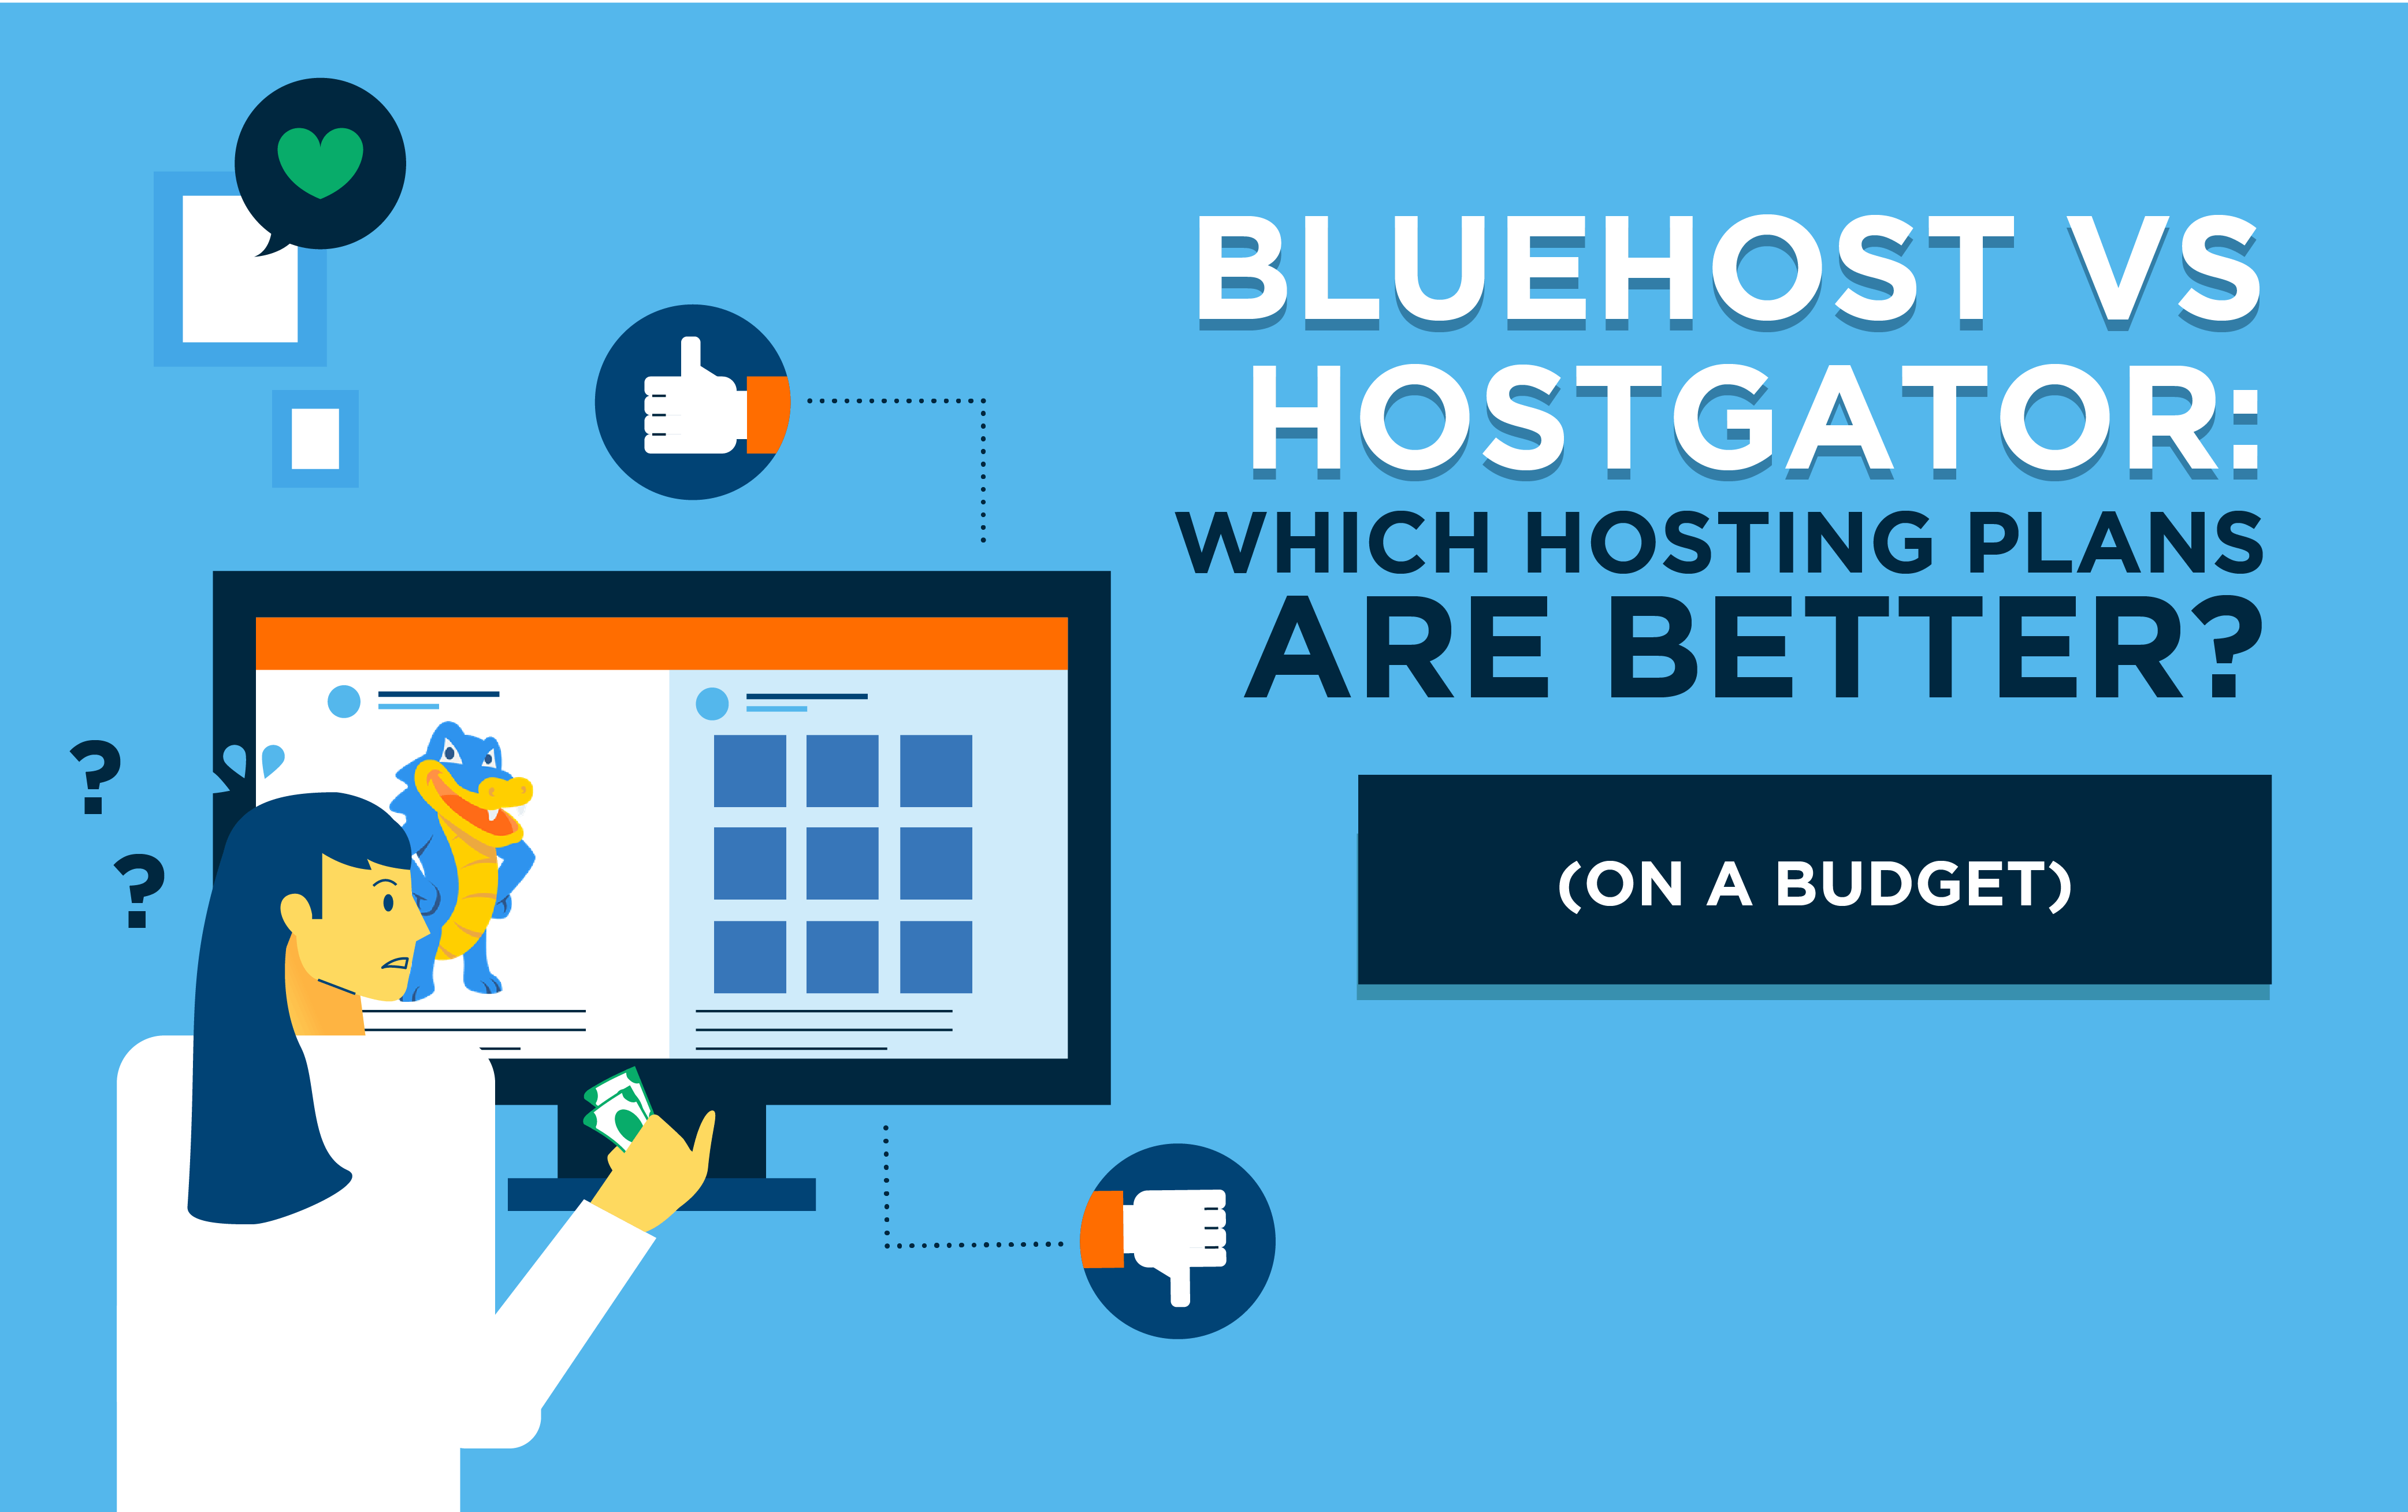 Bluehost vs HostGator: Which Hosting Plans are Better on a Budget